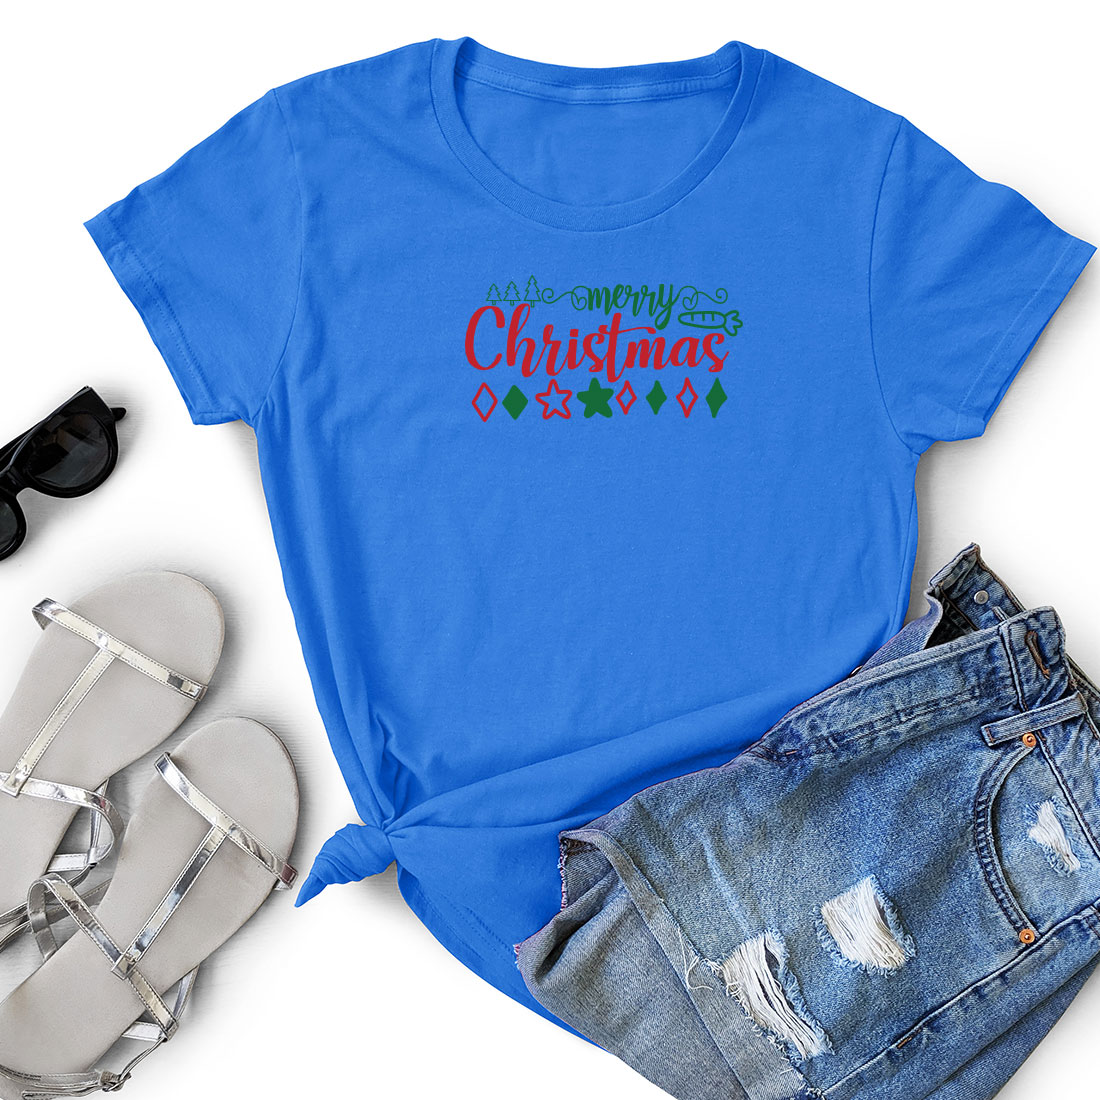 T - shirt that says merry christmas and a pair of shorts.